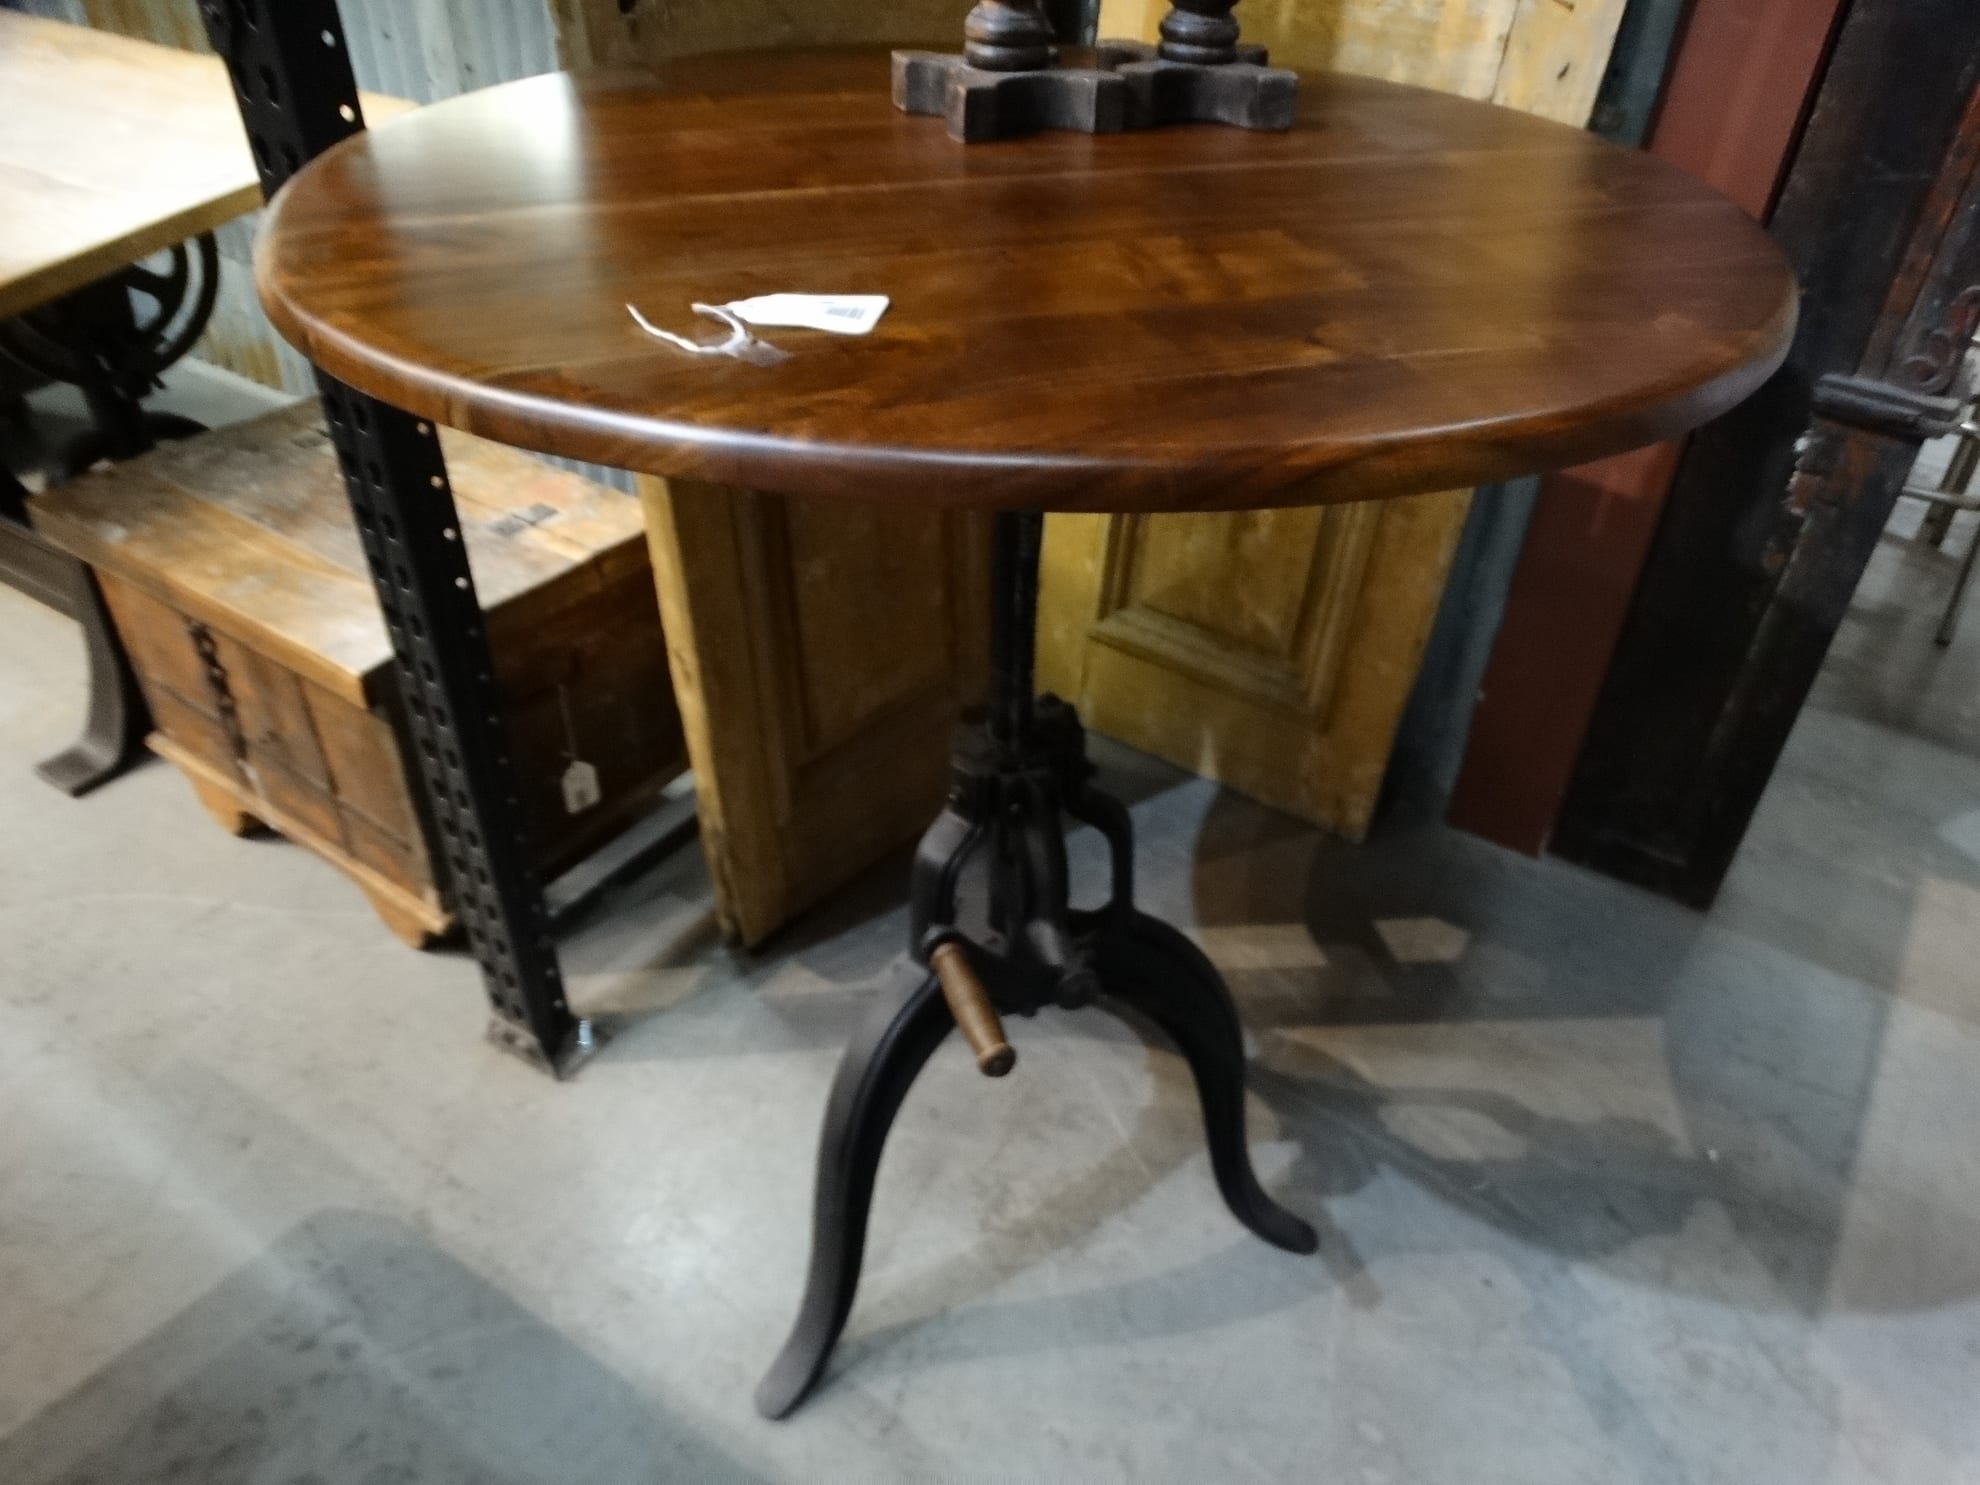 Table Round Crank Base Bistro Table